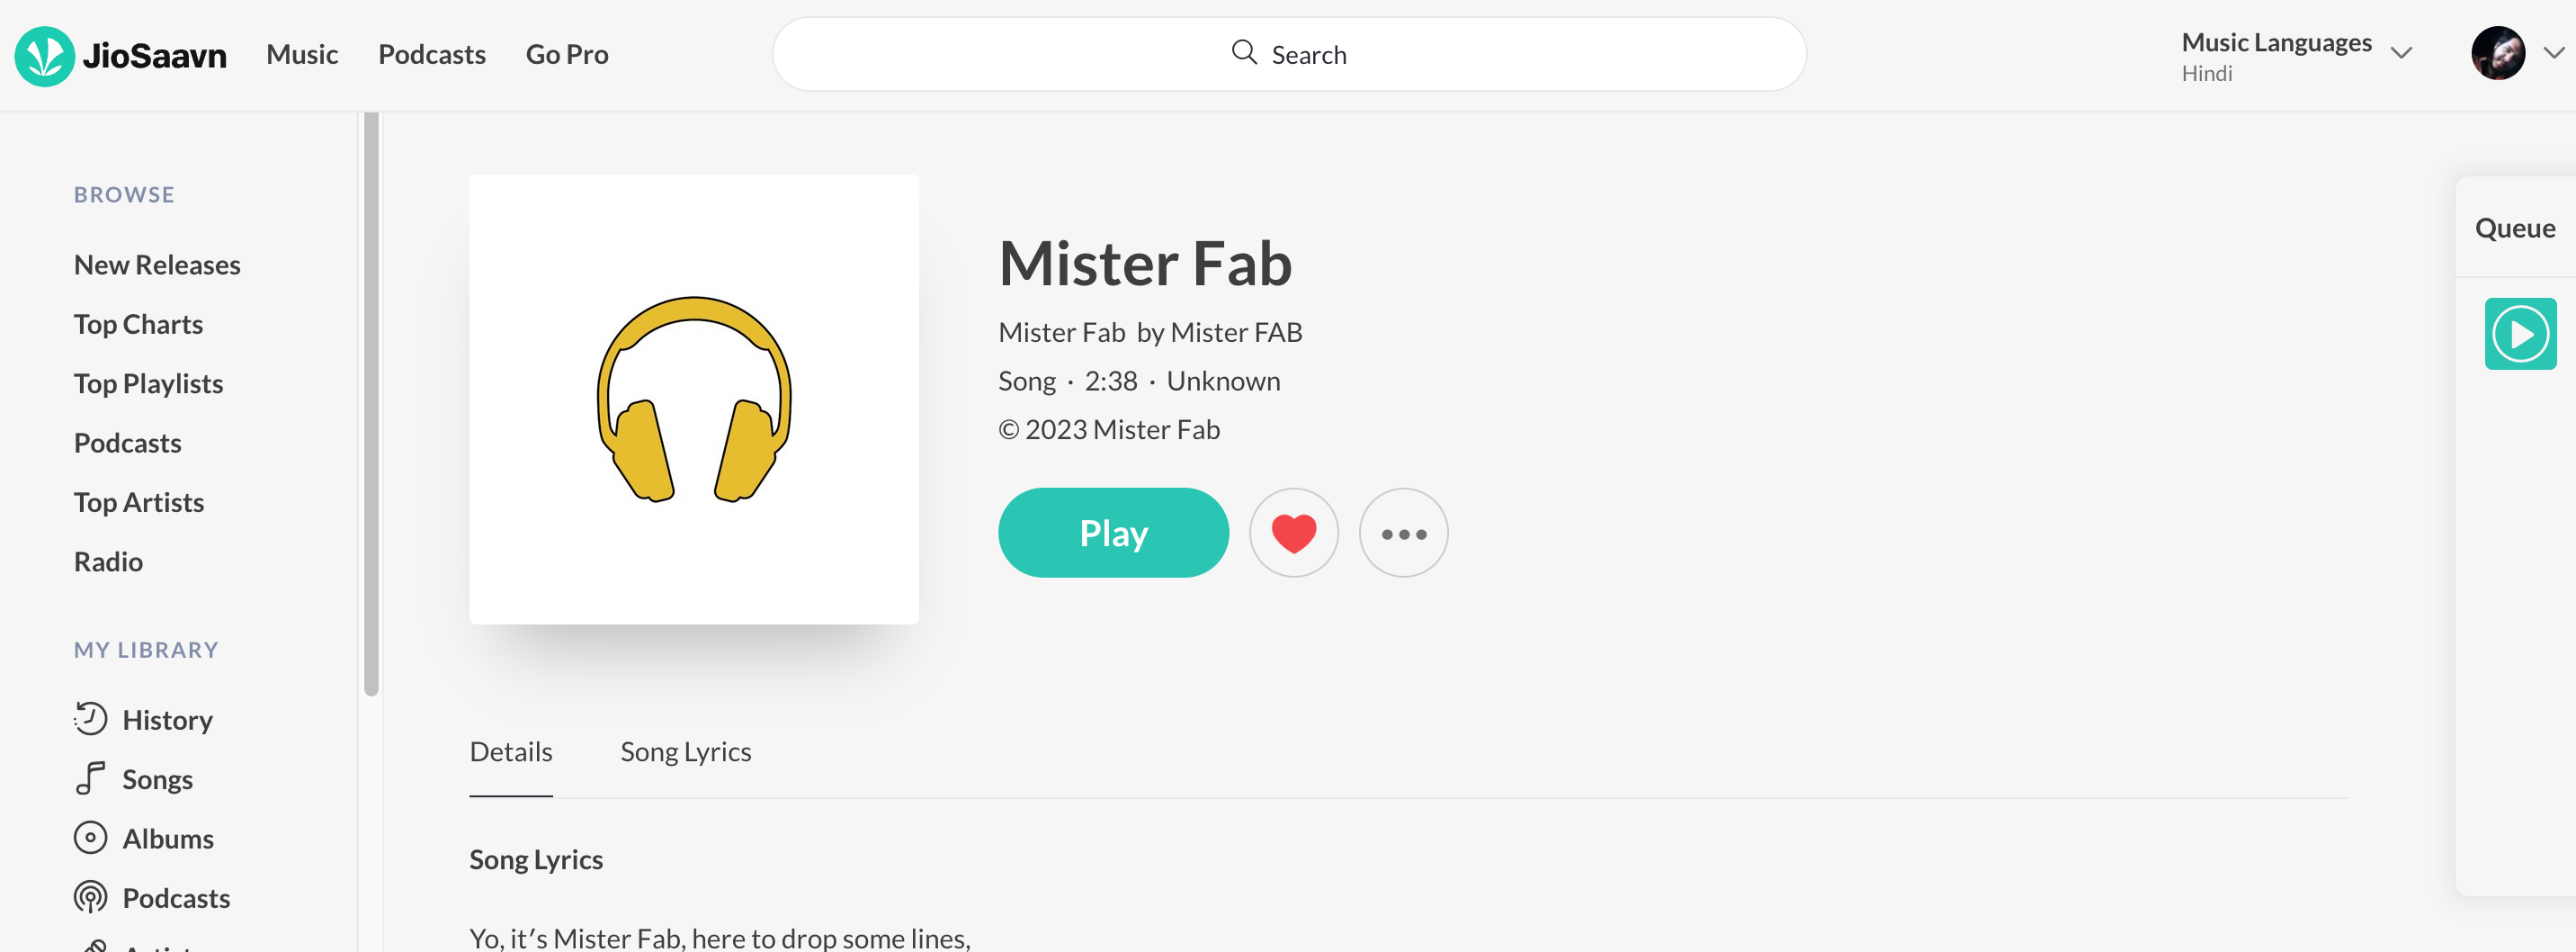 Download Mister Fab song from JioSaavn